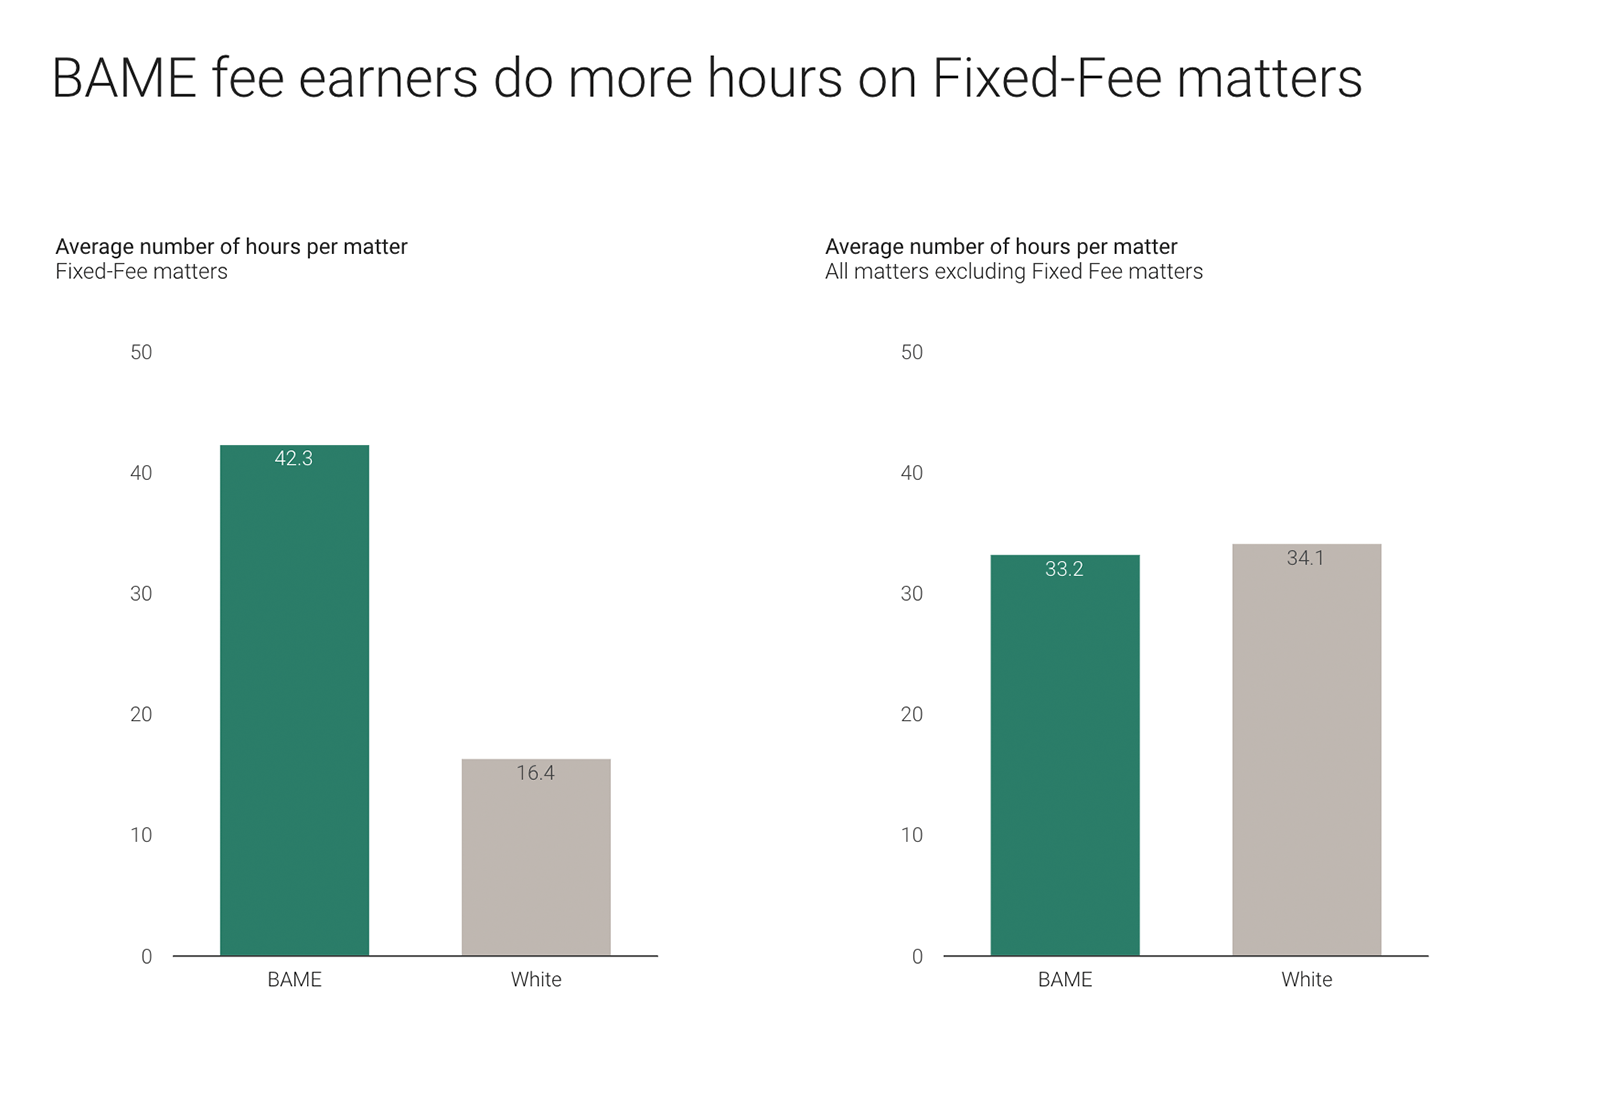 ‘BAME fee earners do more hours on Fixed-Fee matters.’ Fictional data for illustration only.